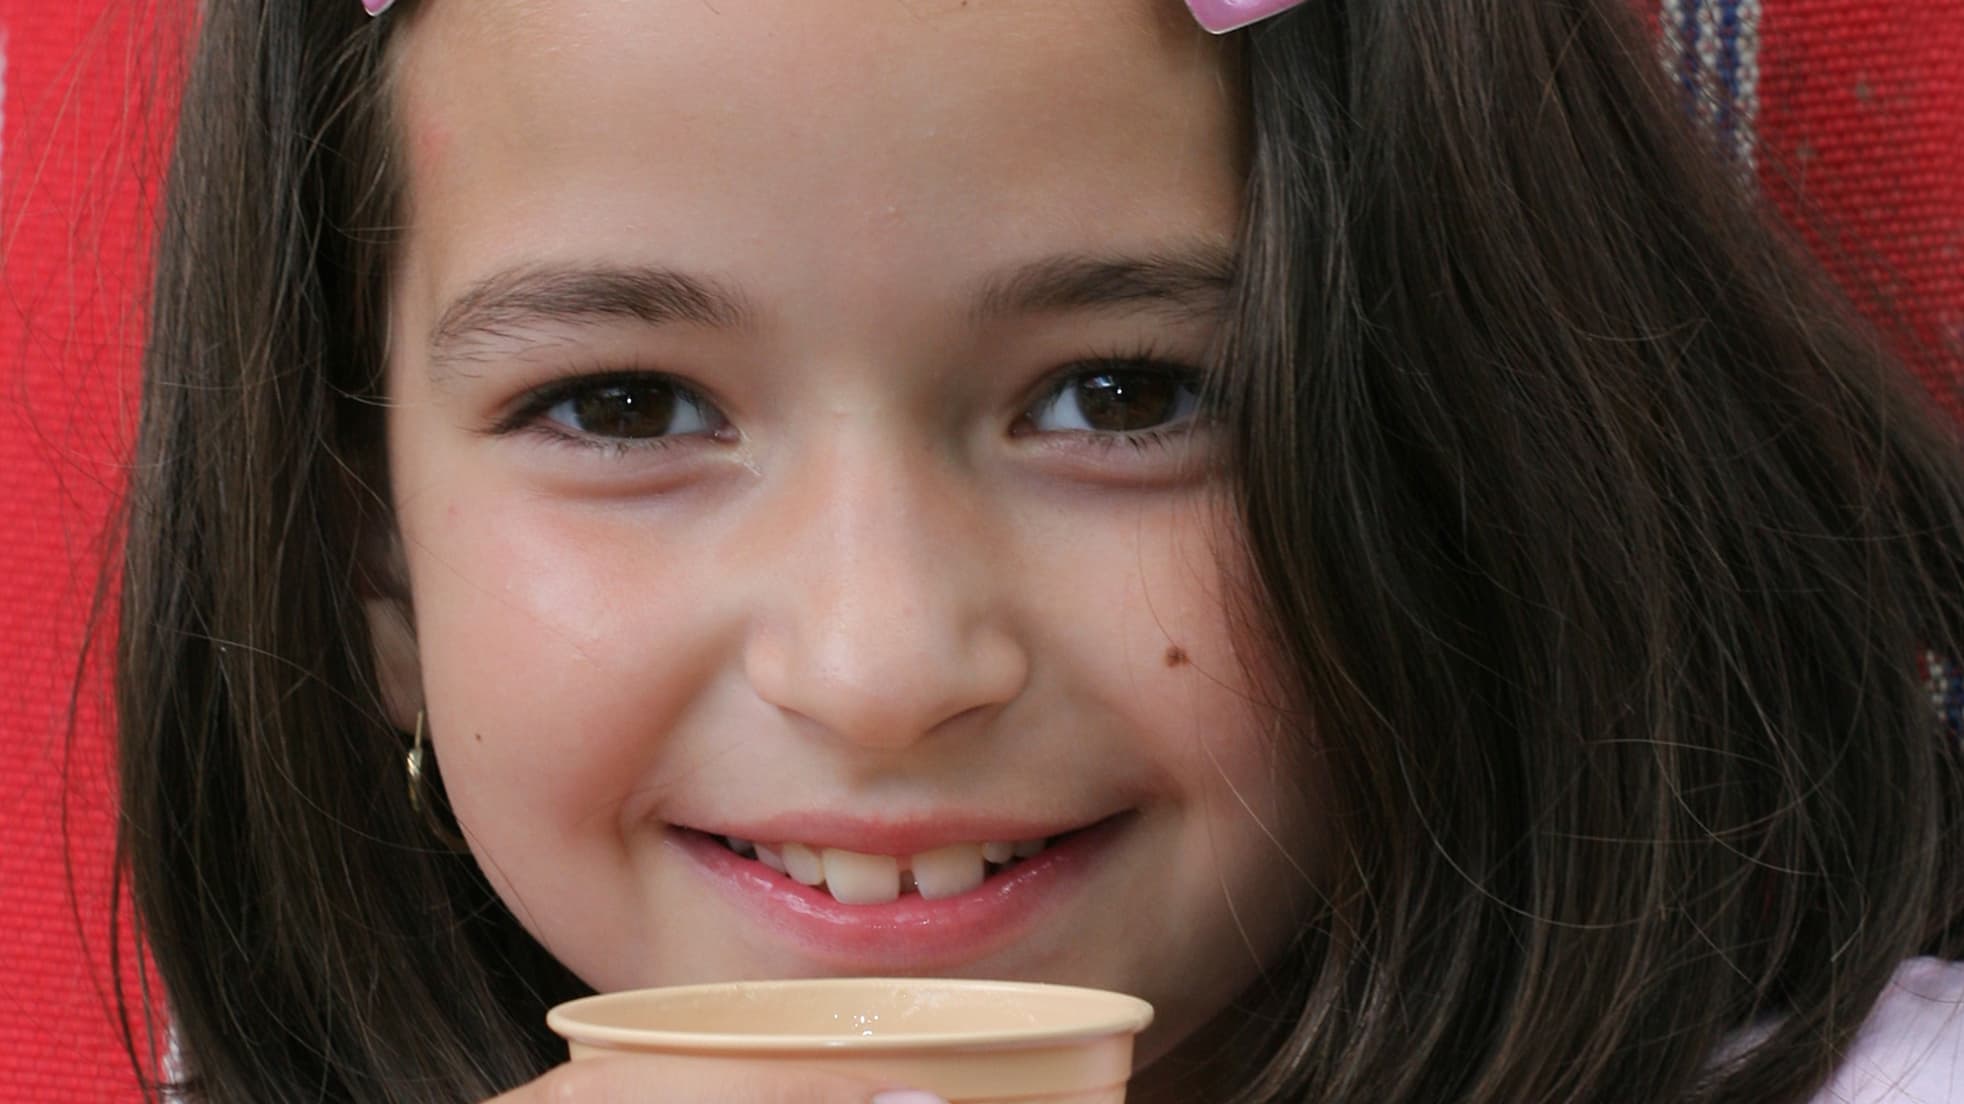 A girl who may have a congenital hand condition holds a cup.